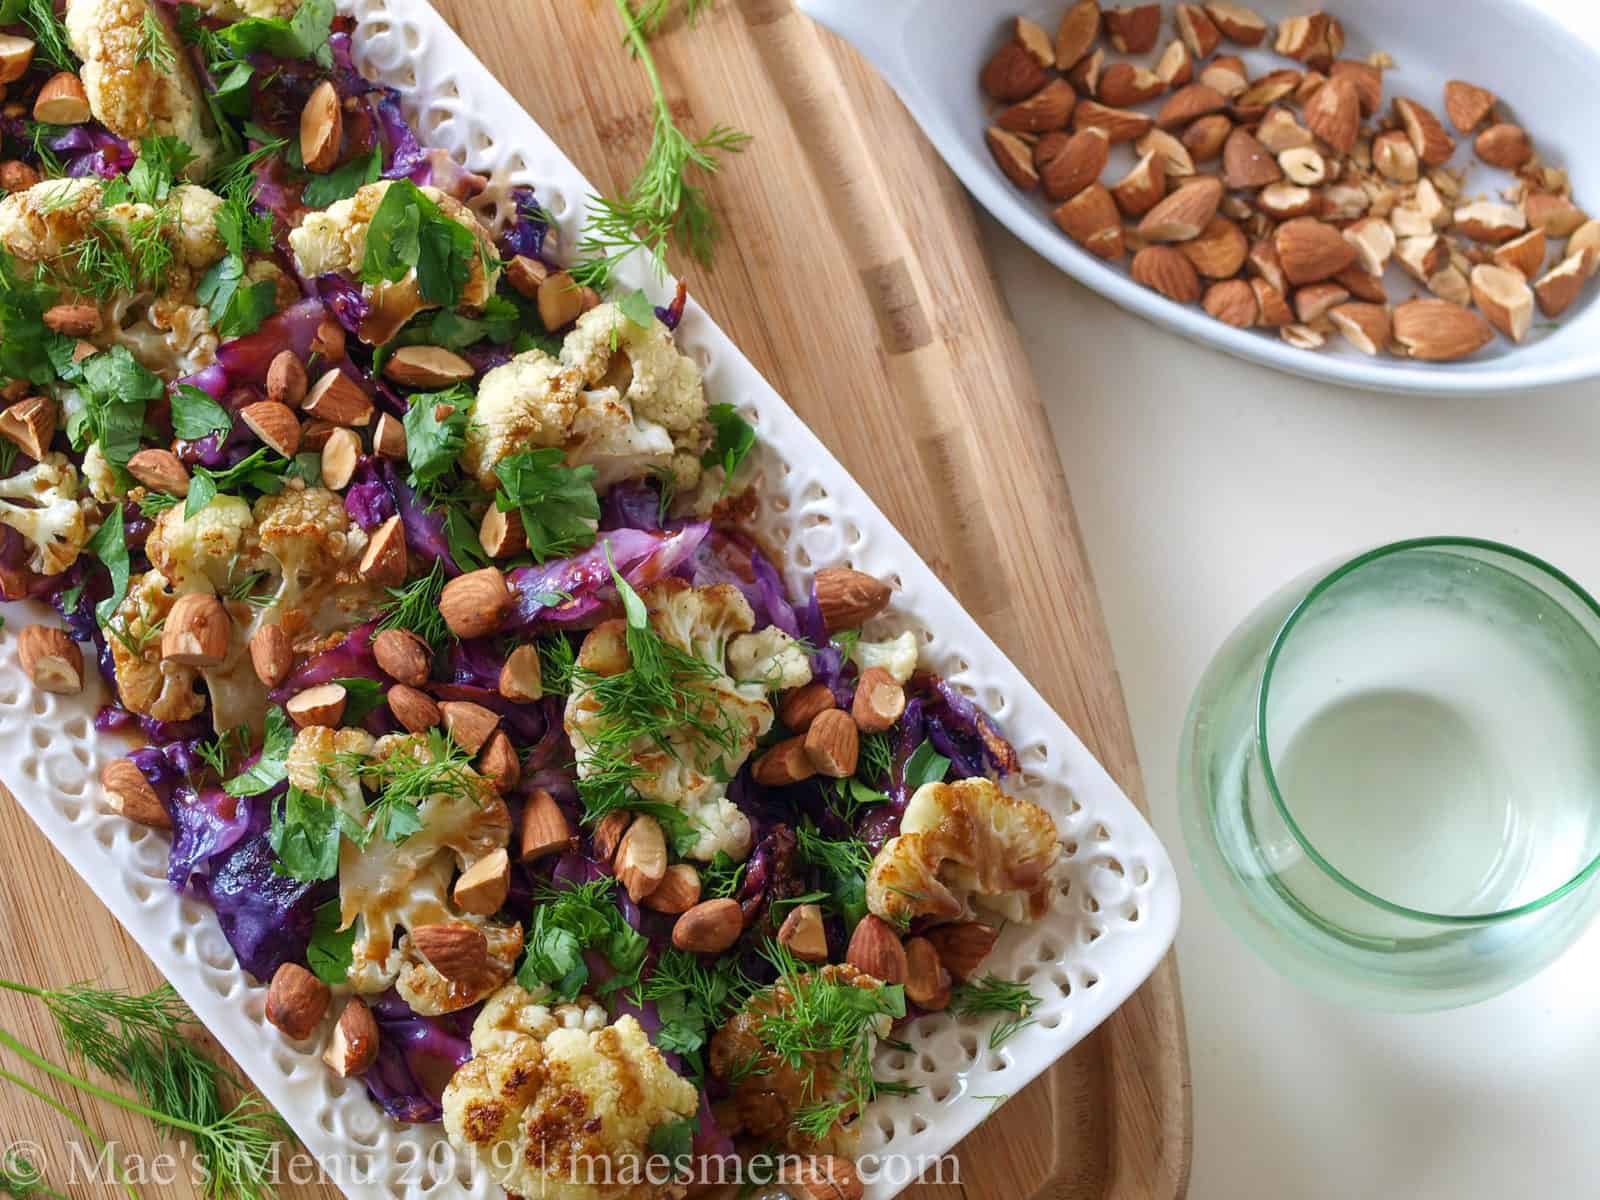 Platter of Roasted Cauliflower & Cabbage Salad Recipe with a glass of sparkling water and dish of roasted nuts.